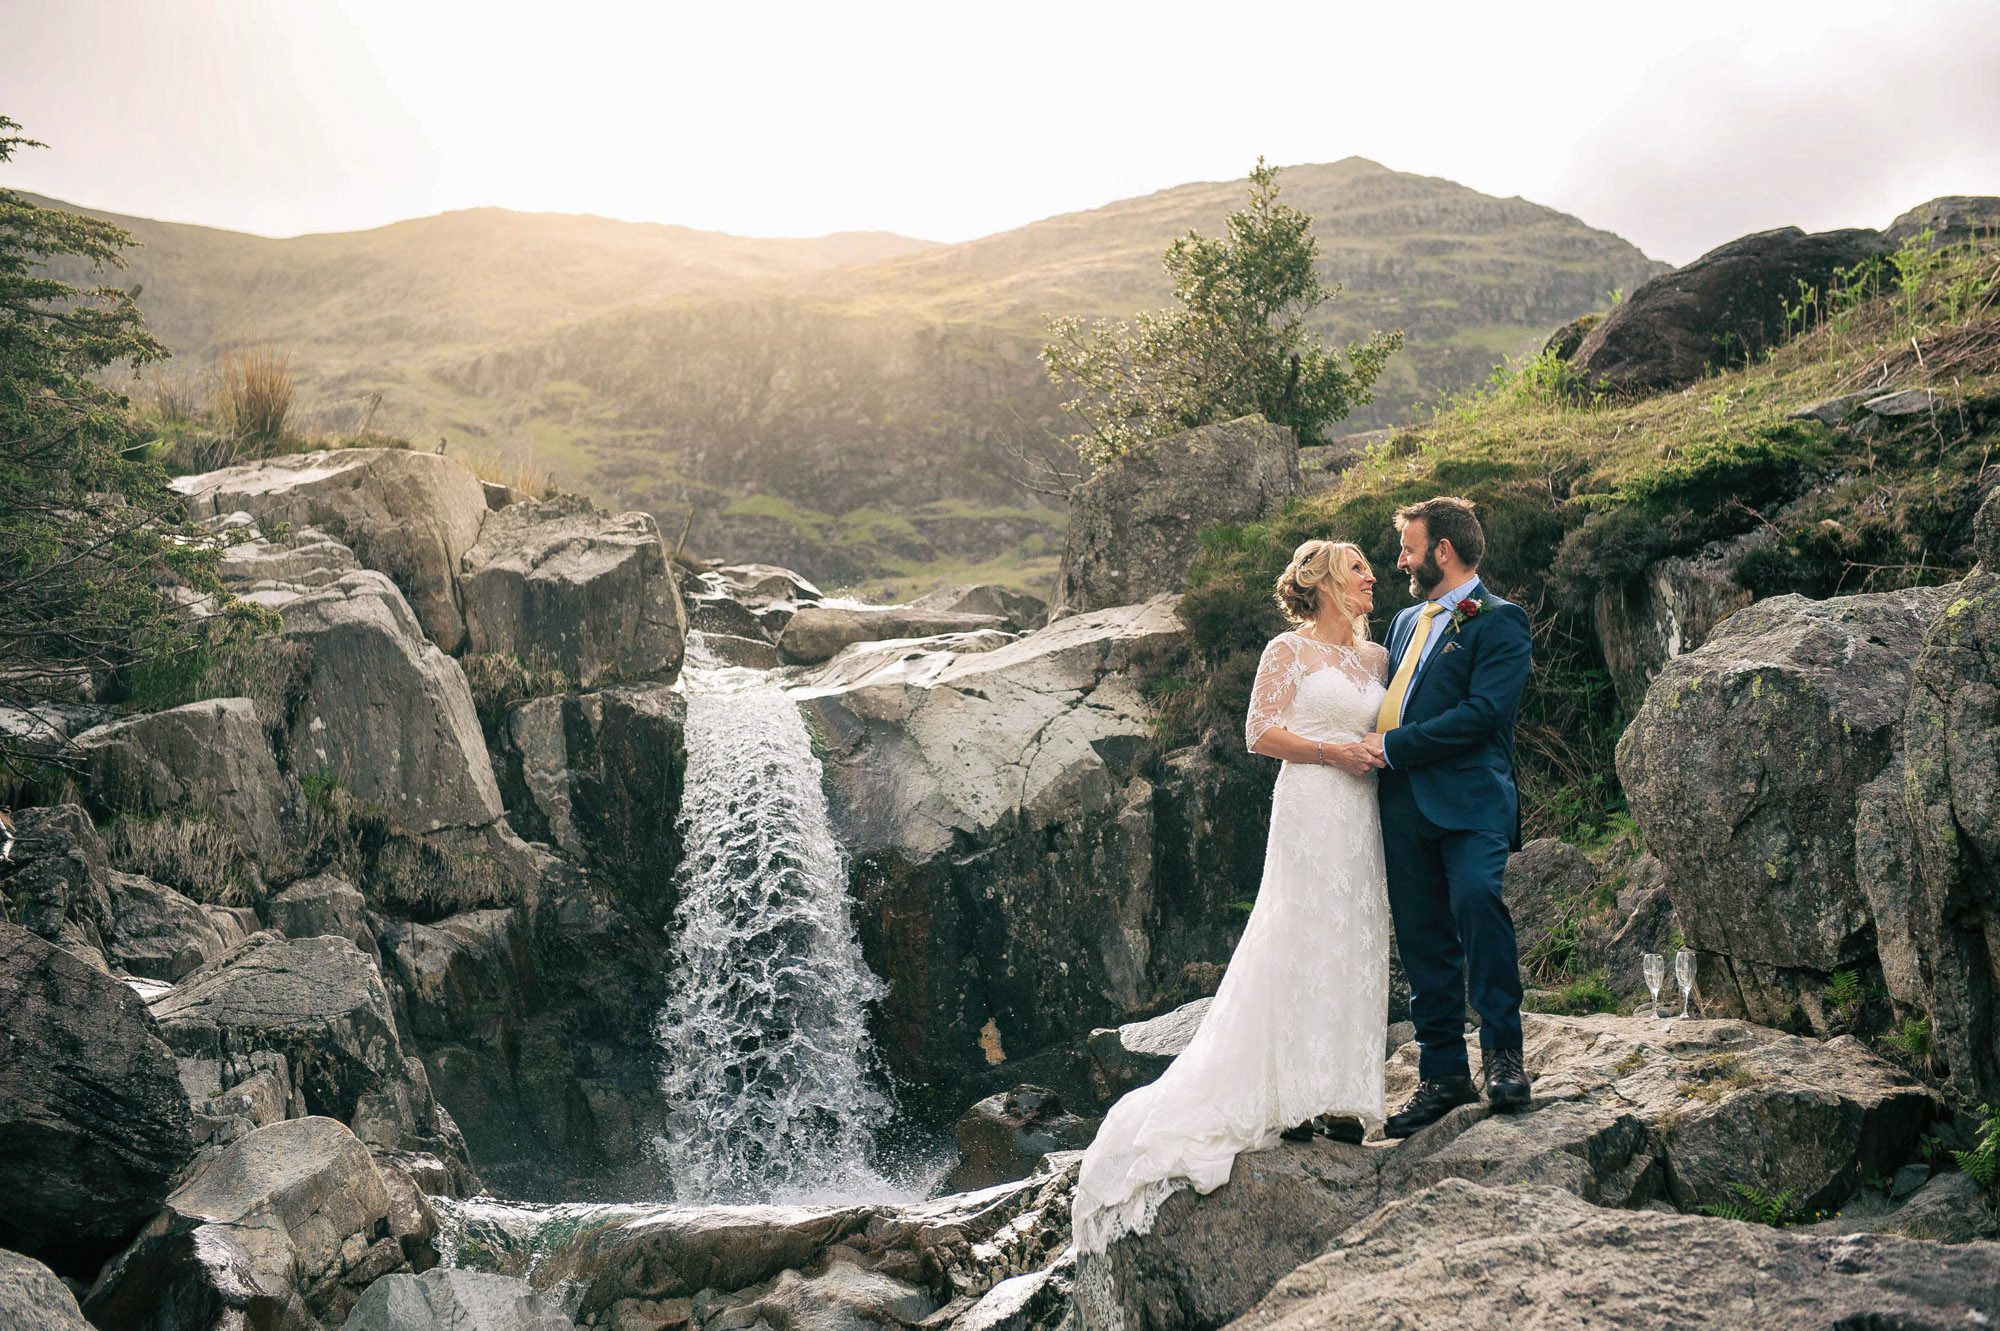 Bride and Groom portrait in front of a waterfall at sunset. Taken at Coniston Copper Mines in the Lake District